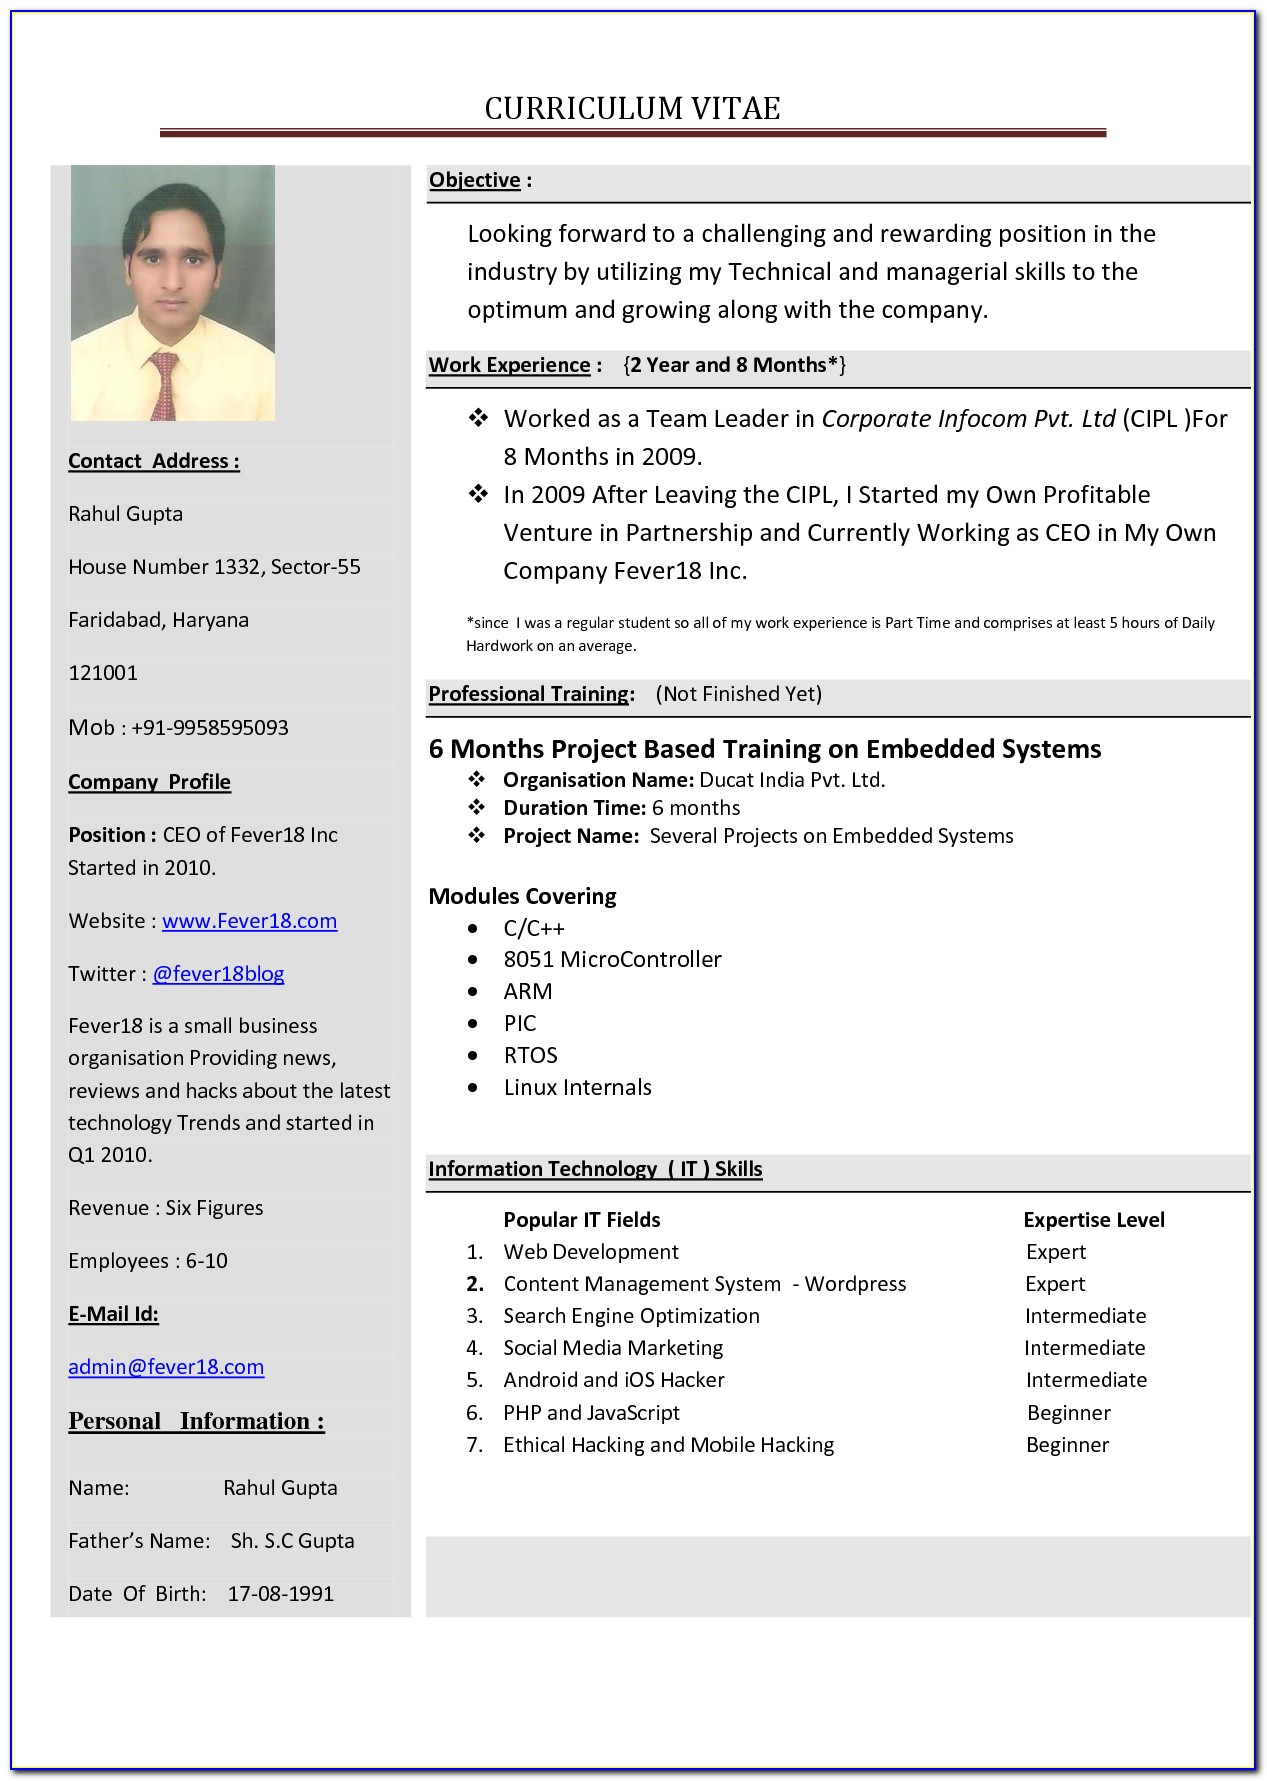 I Want To Create A Resume